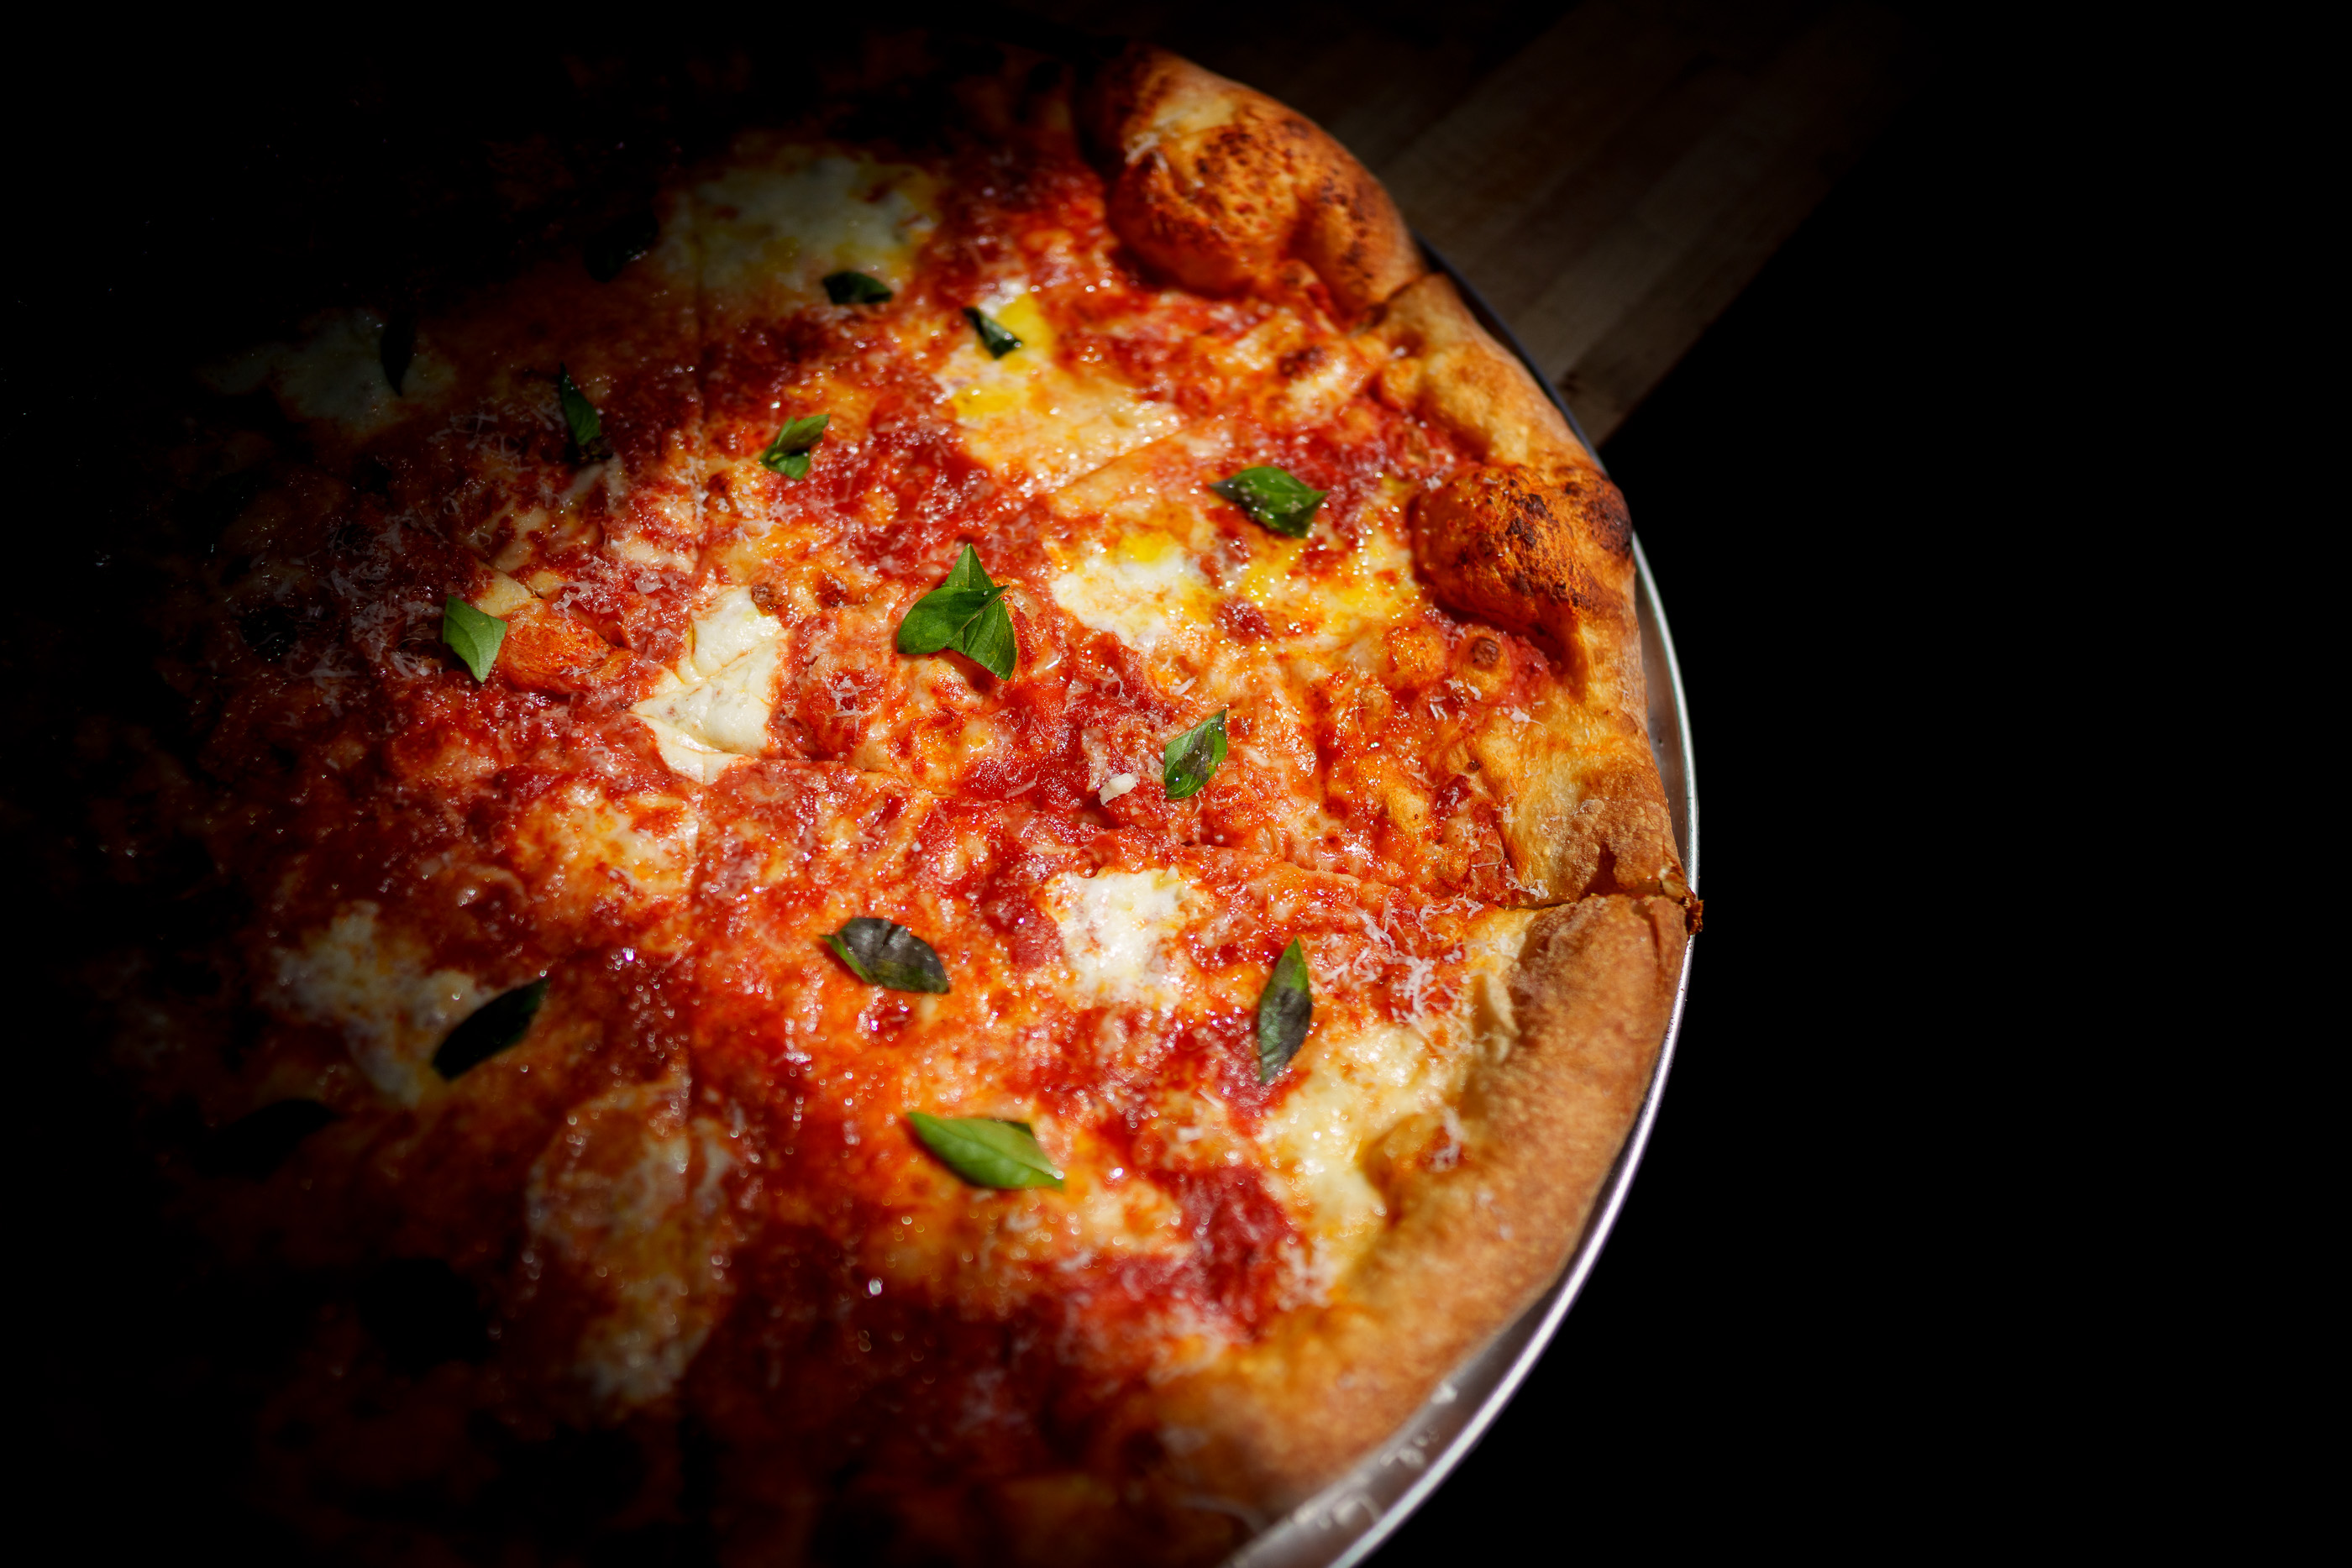 21 reasons why South Shore bar pizza is America's most delicious (and most  eccentric) pizza tradition » KJB Trending Hospitality